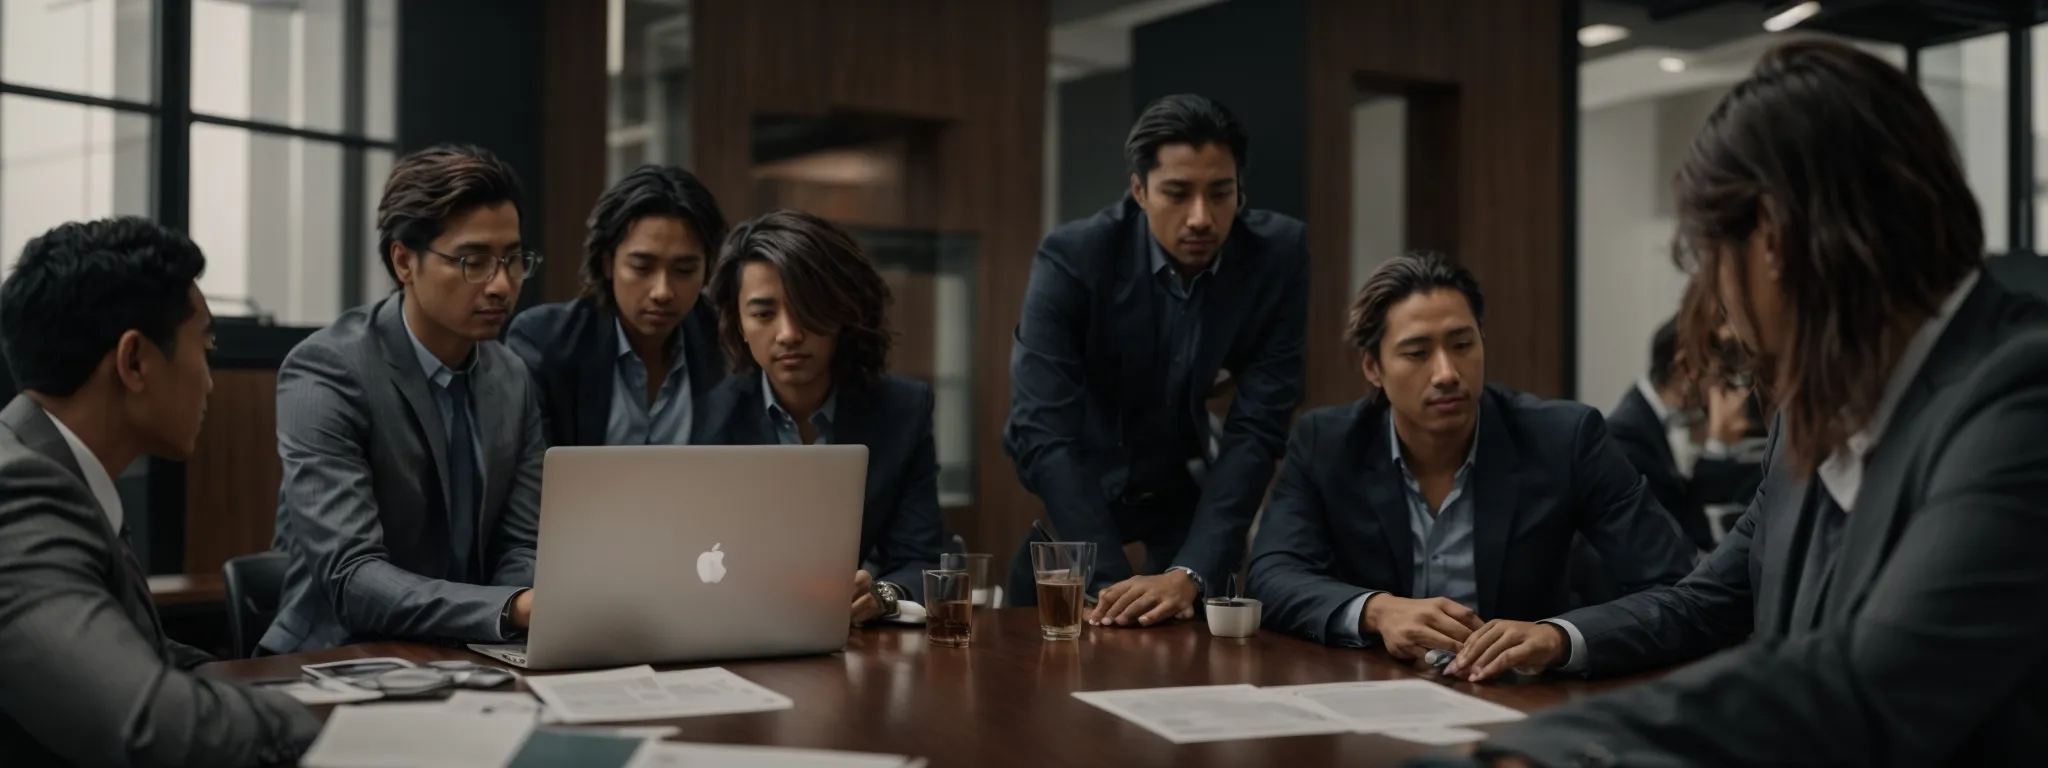 a diverse team of professionals gather around a conference table, discussing strategies over an open laptop and charts, emphasizing teamwork in a technology-driven workplace.